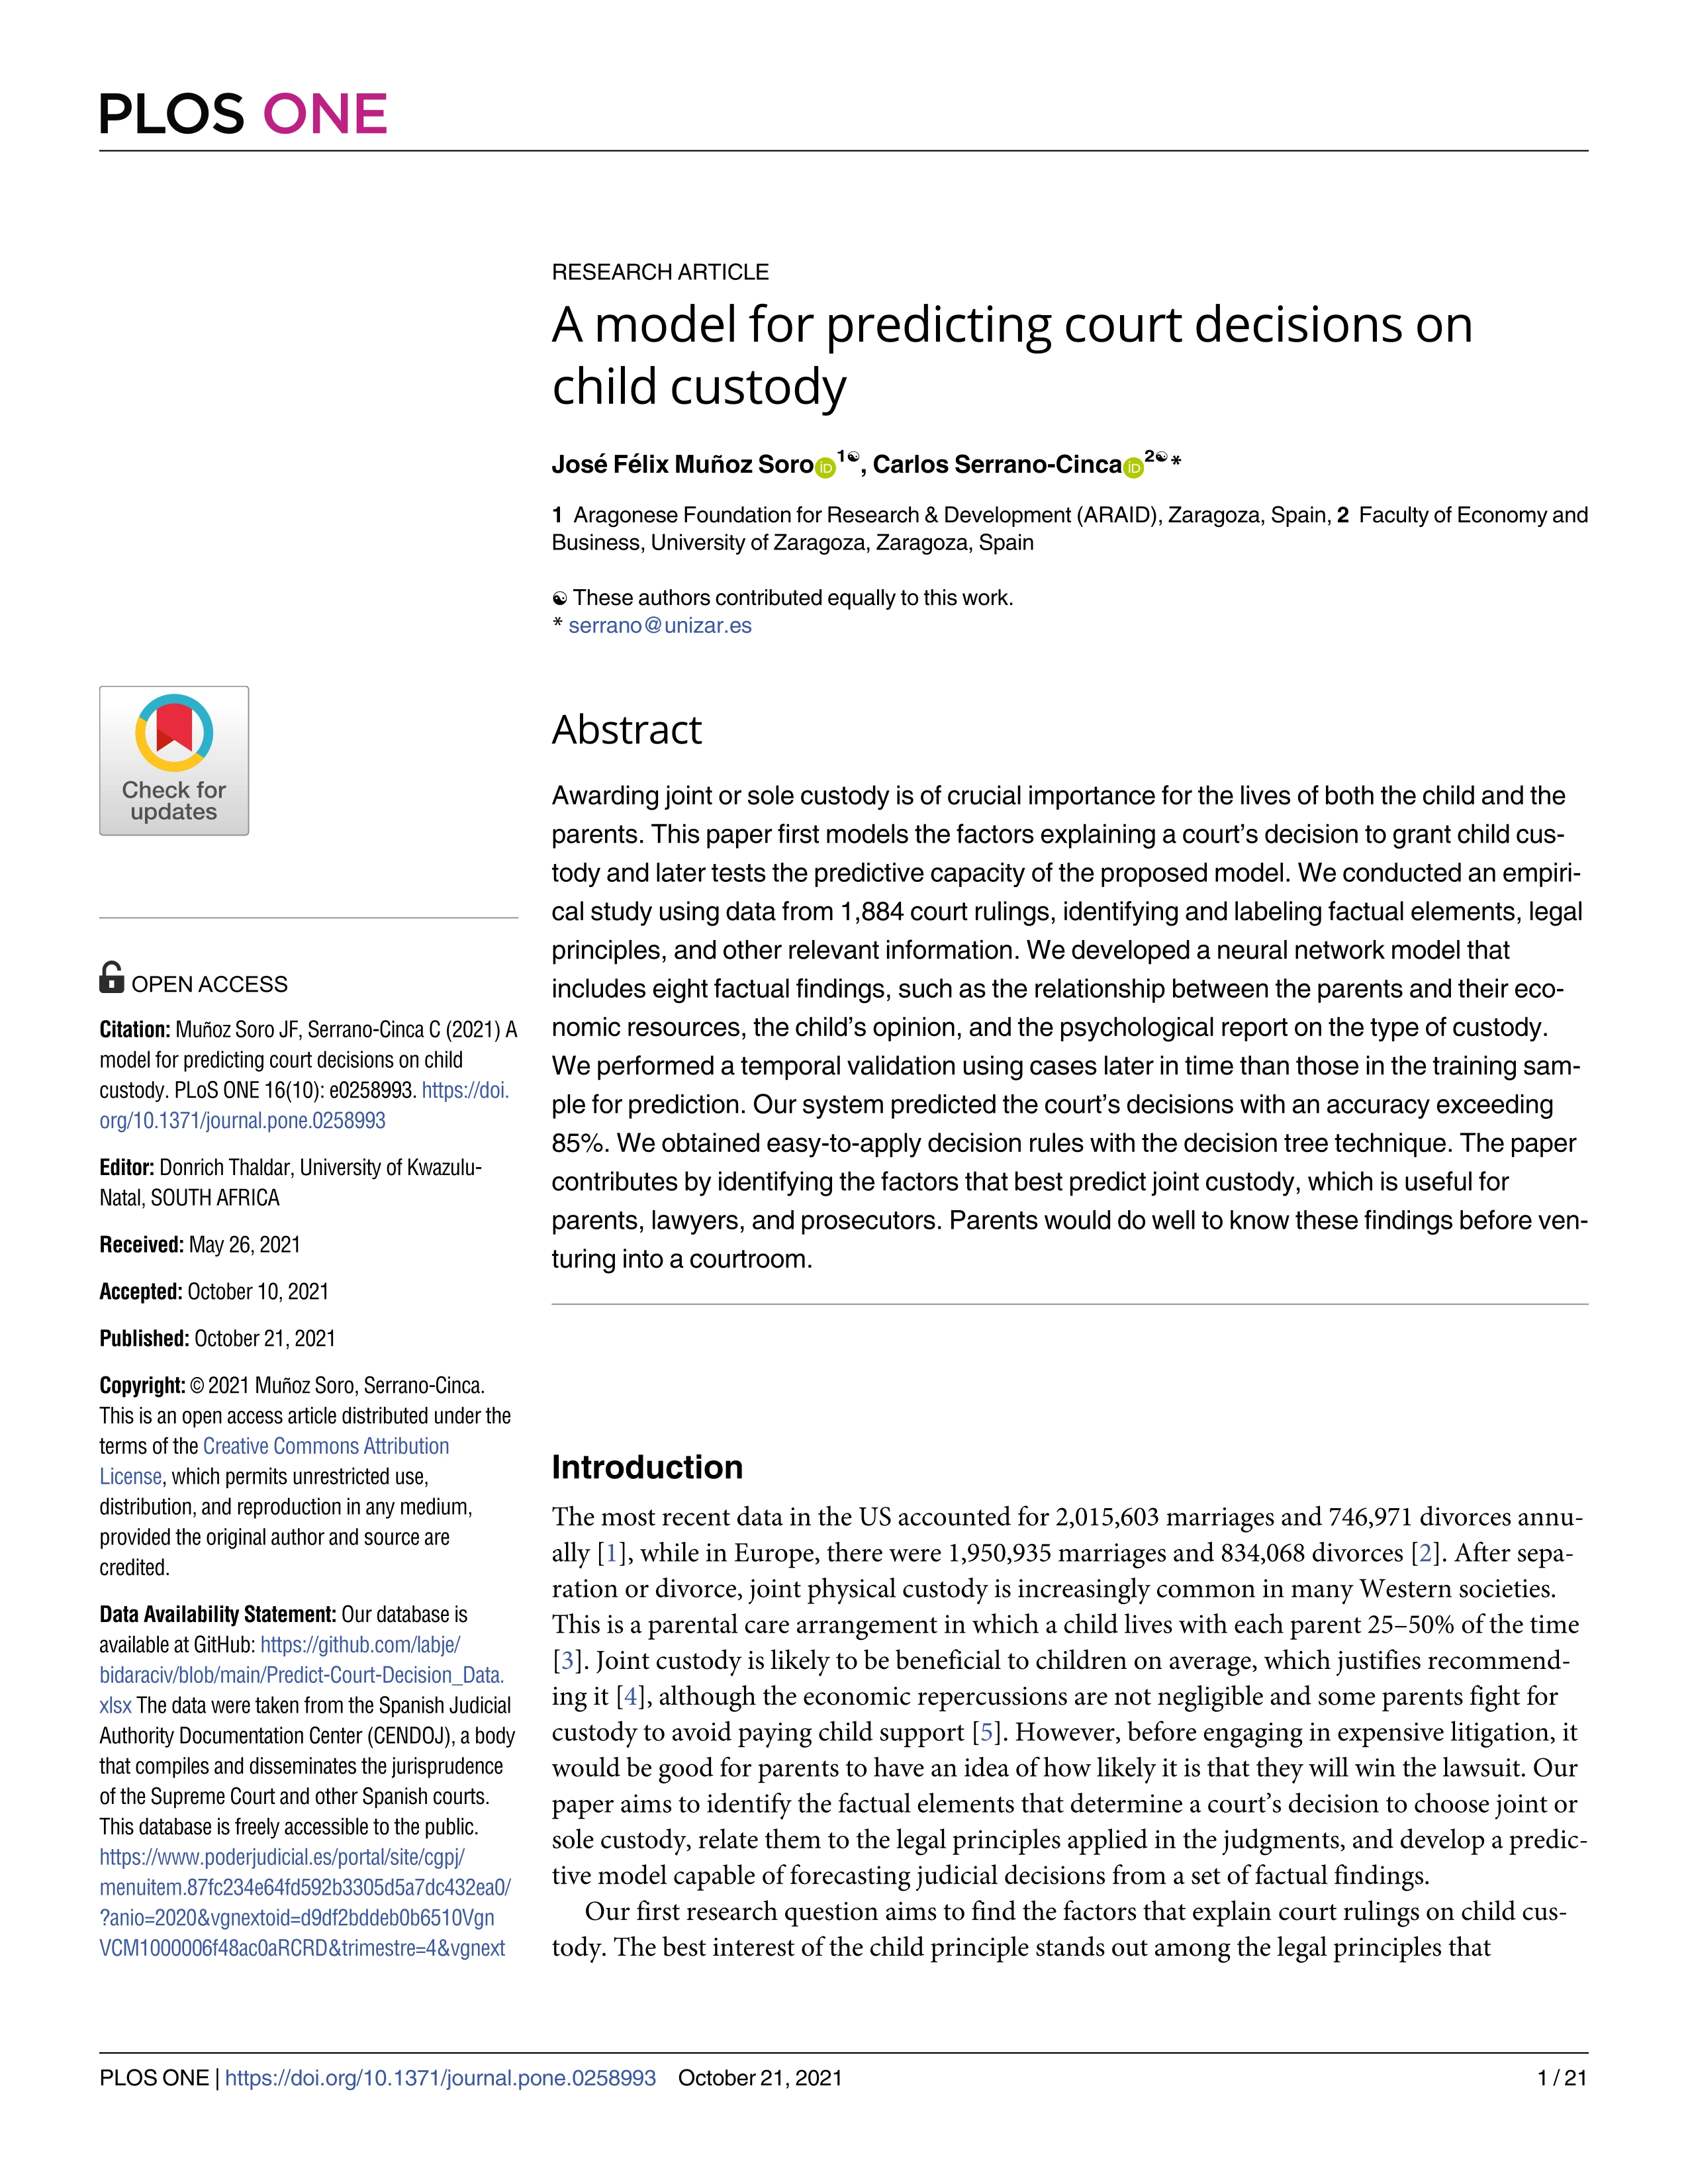 A model for predicting court decisions on child custody